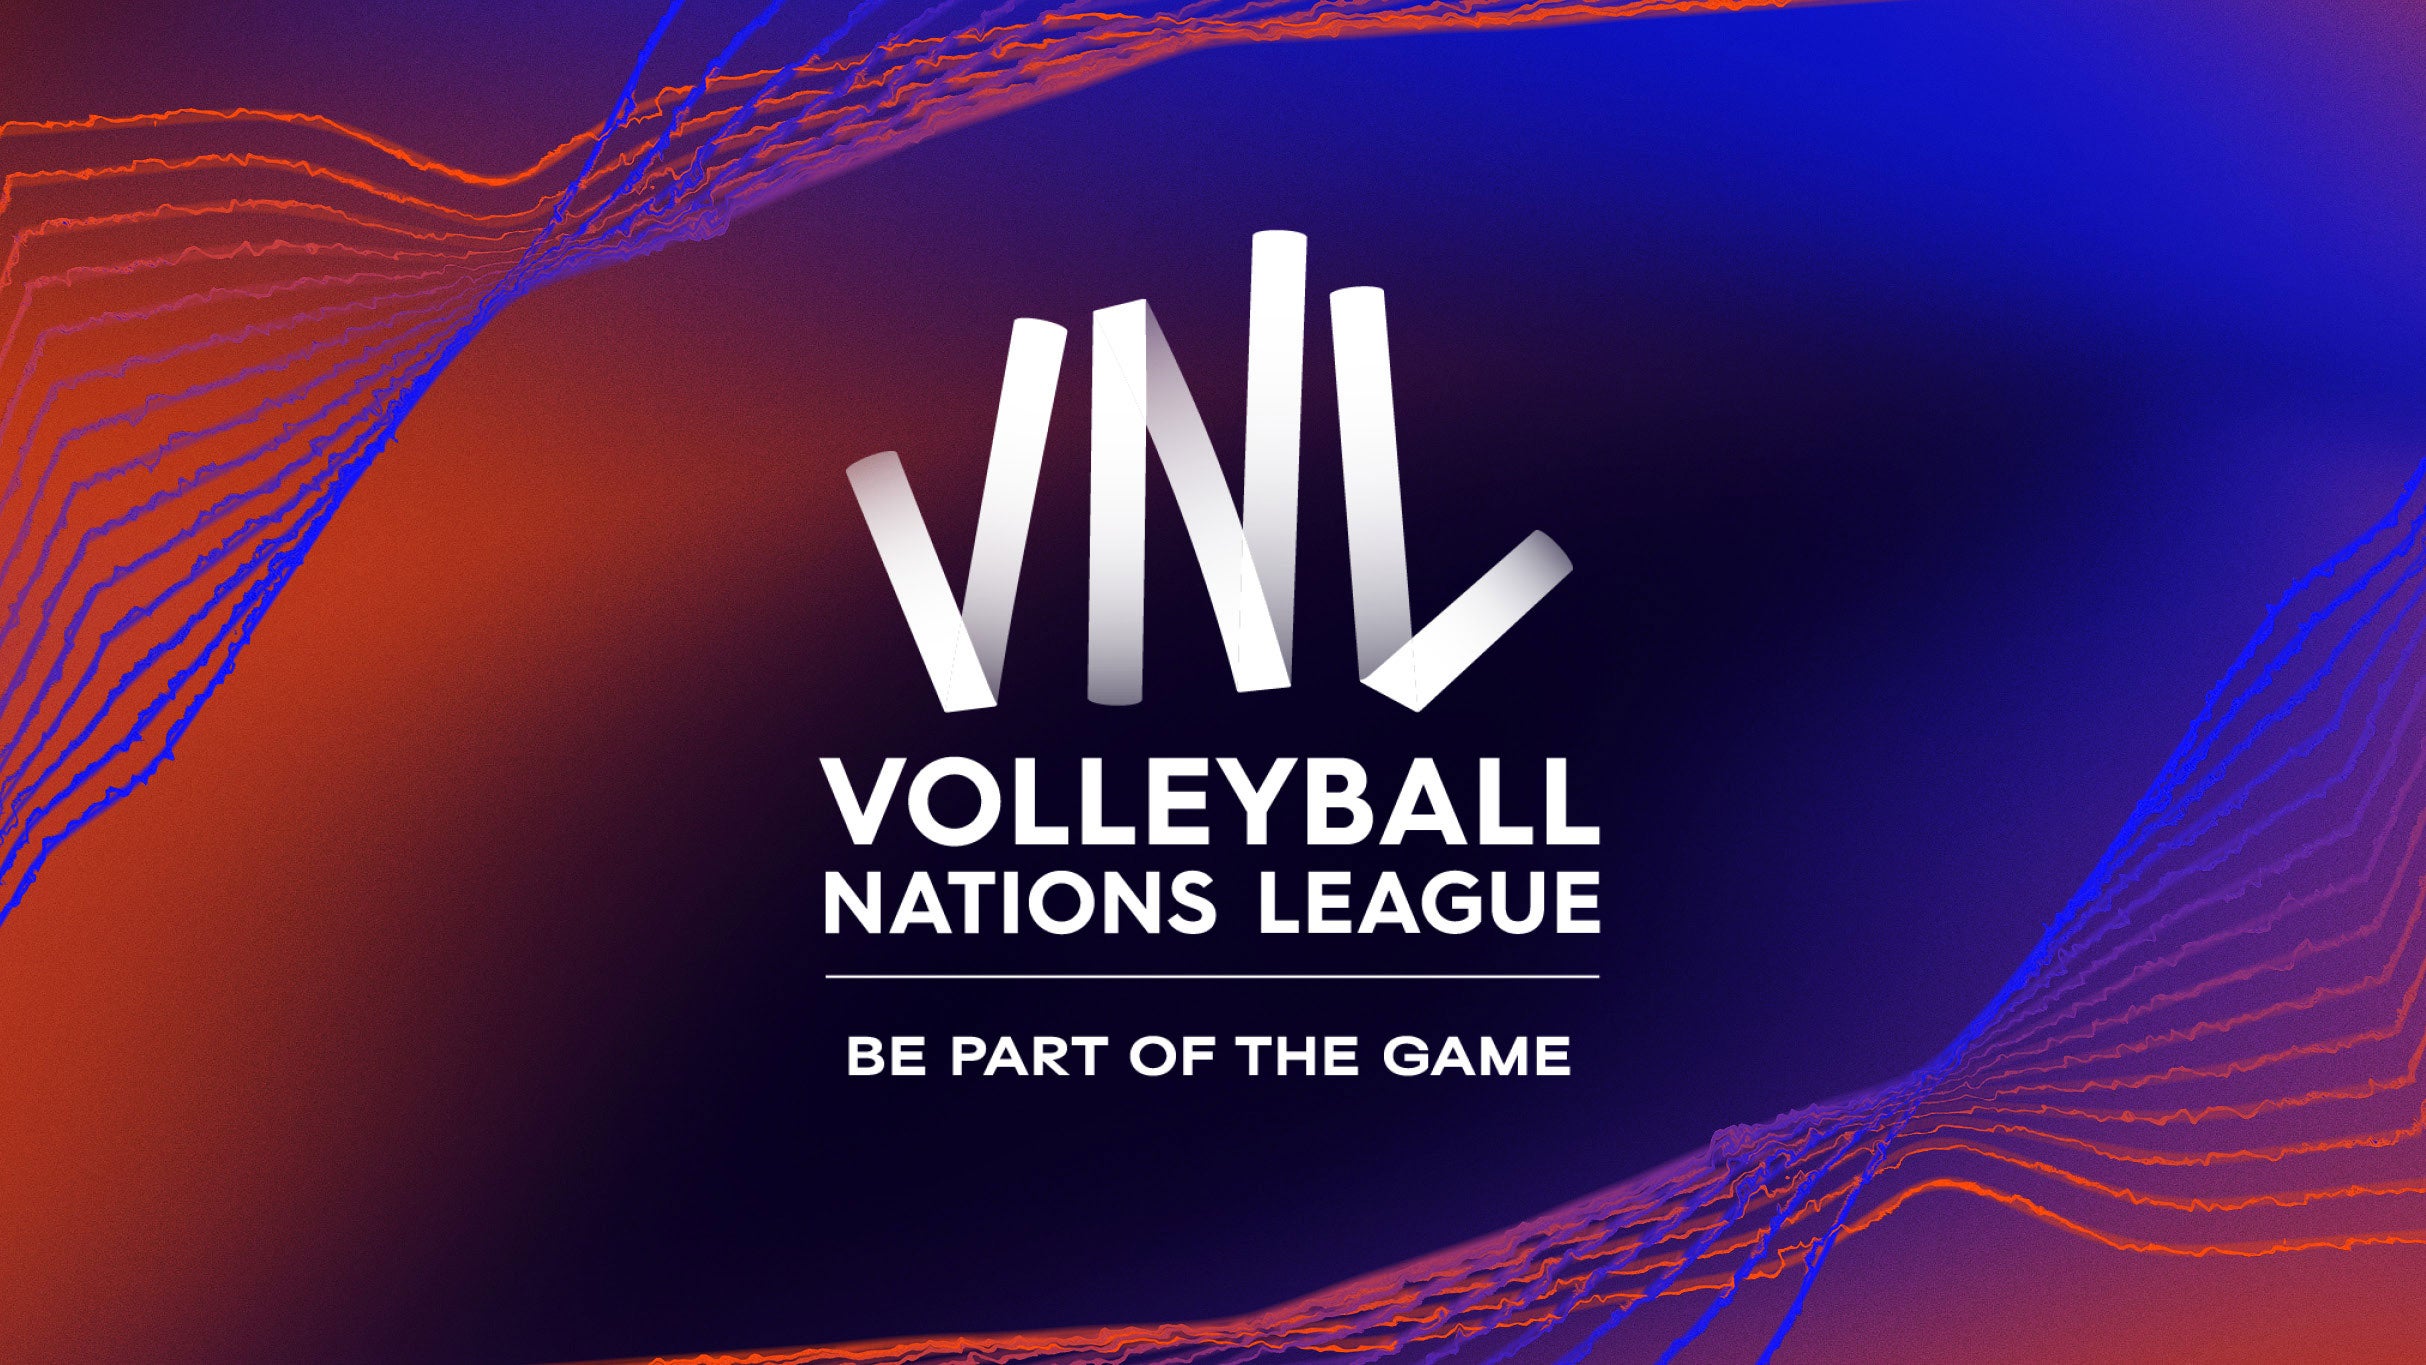 Volleyball Nations League - Match Day 1 presales in Ottawa